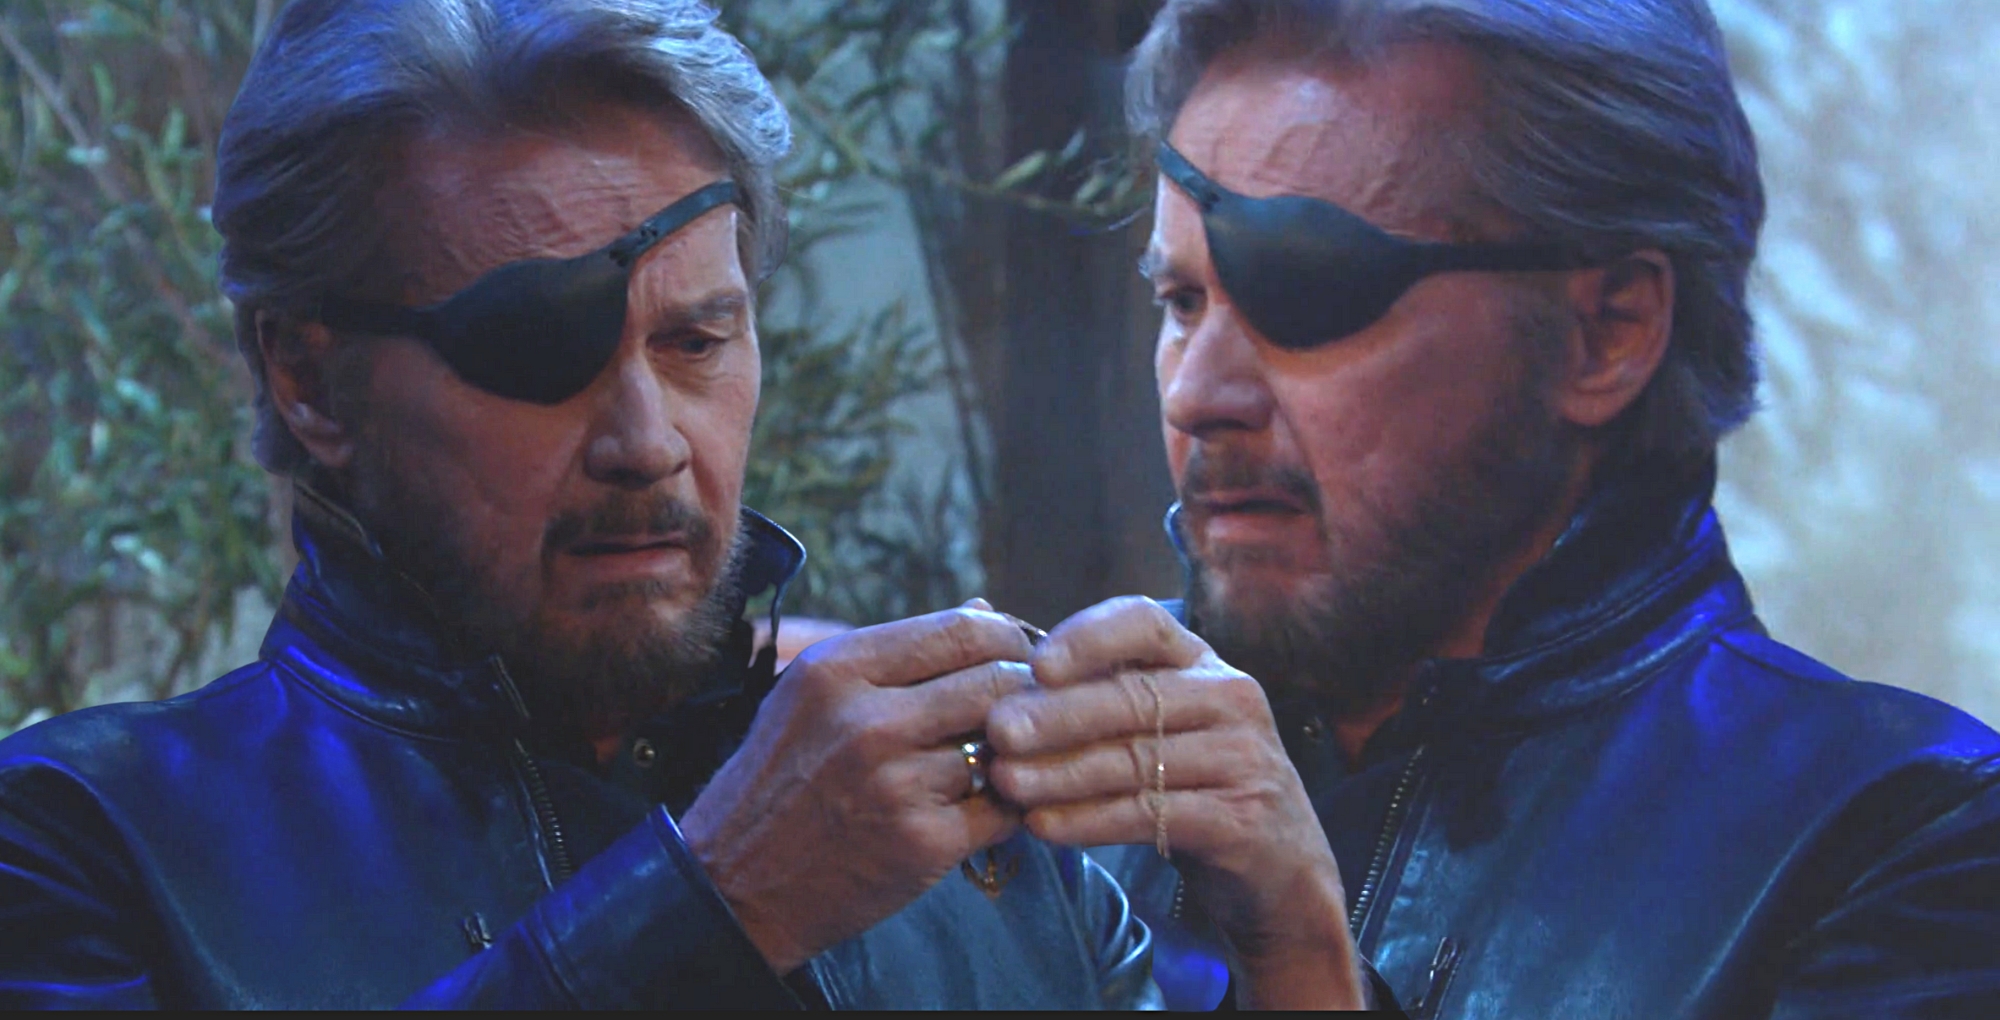 days of our lives showcased stephen nichols talents as steve johnson